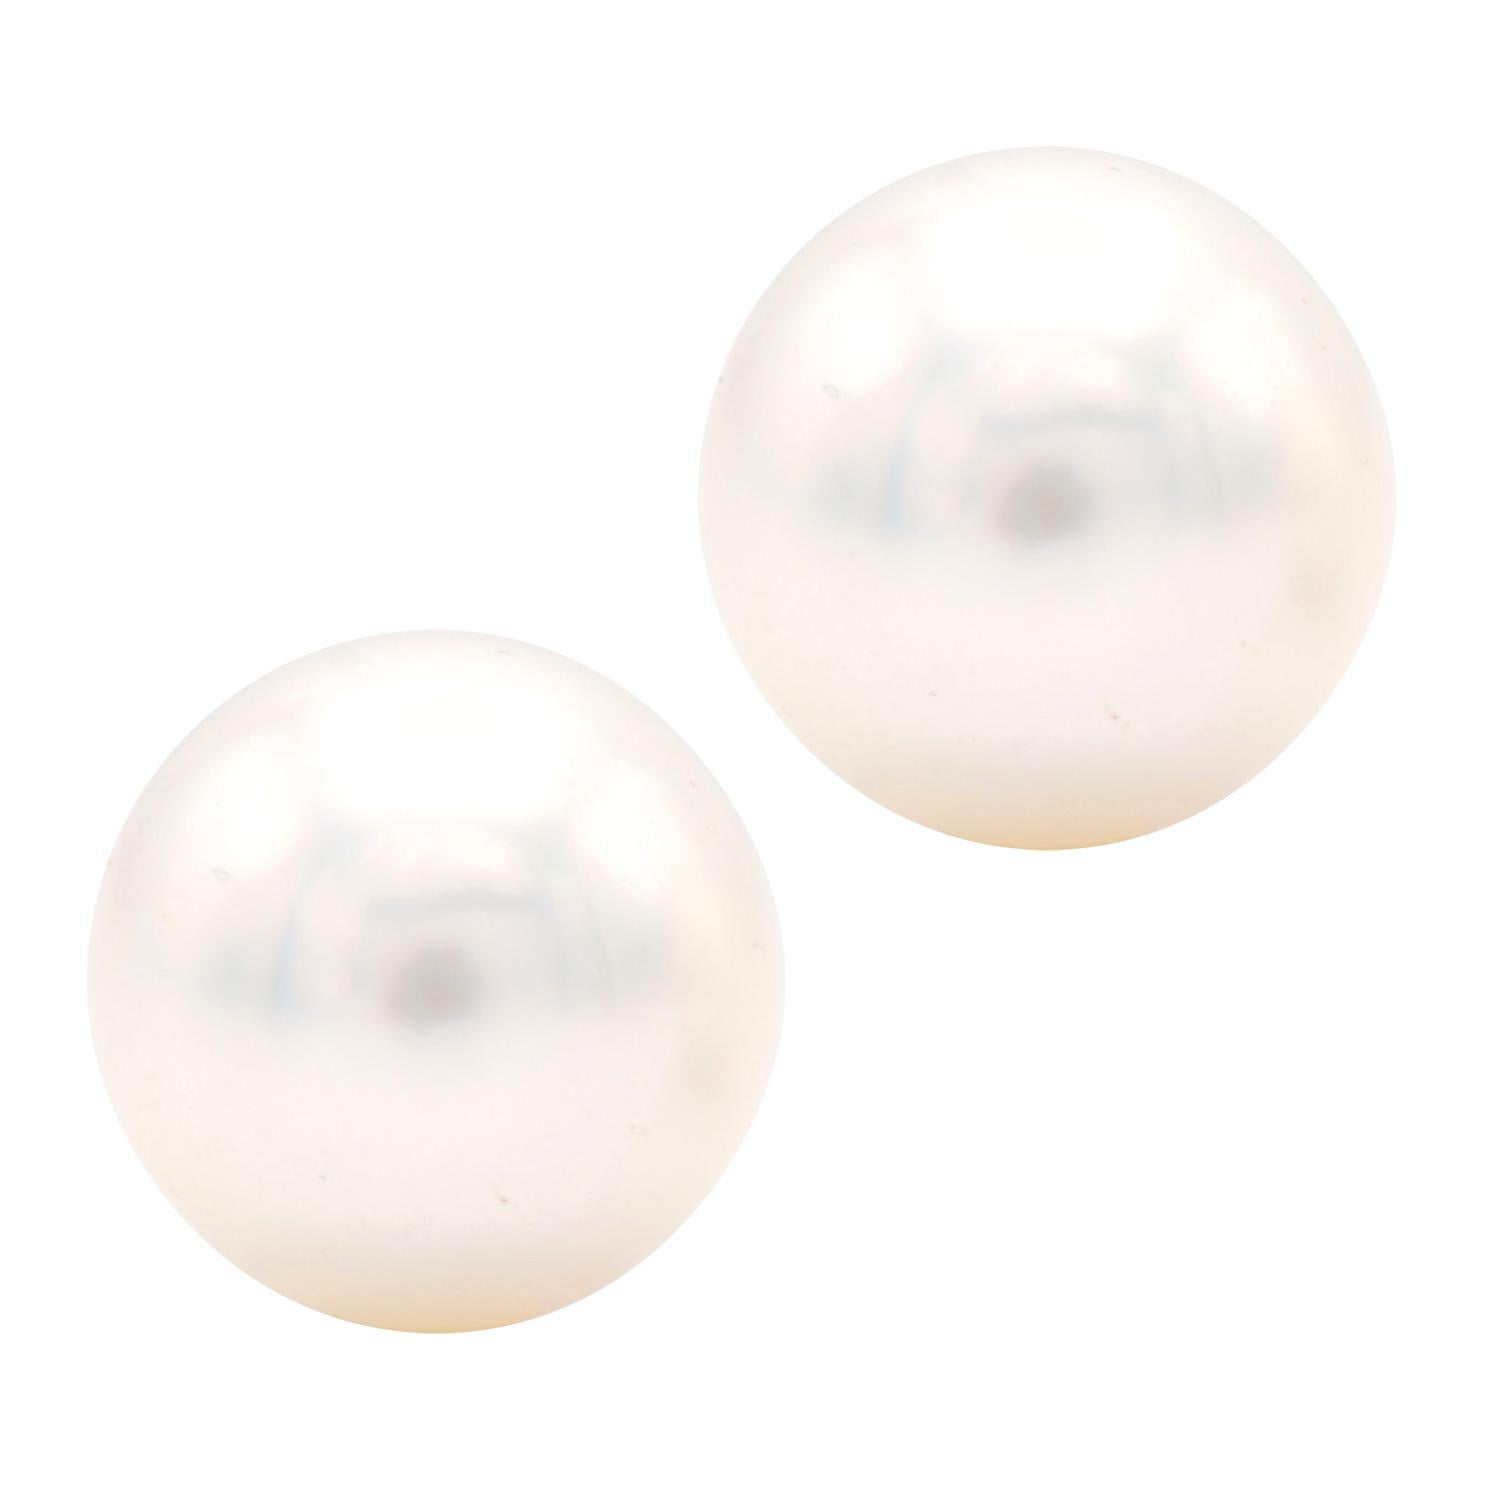 Cultured pearl stud earrings are the most classic and timeless piece of jewelry. They can be worn by anyone and everyone and make an excellent gift for all occasions. These 7.5-8mm cultured pearl earrings are perfectly matched and set in 14 karat